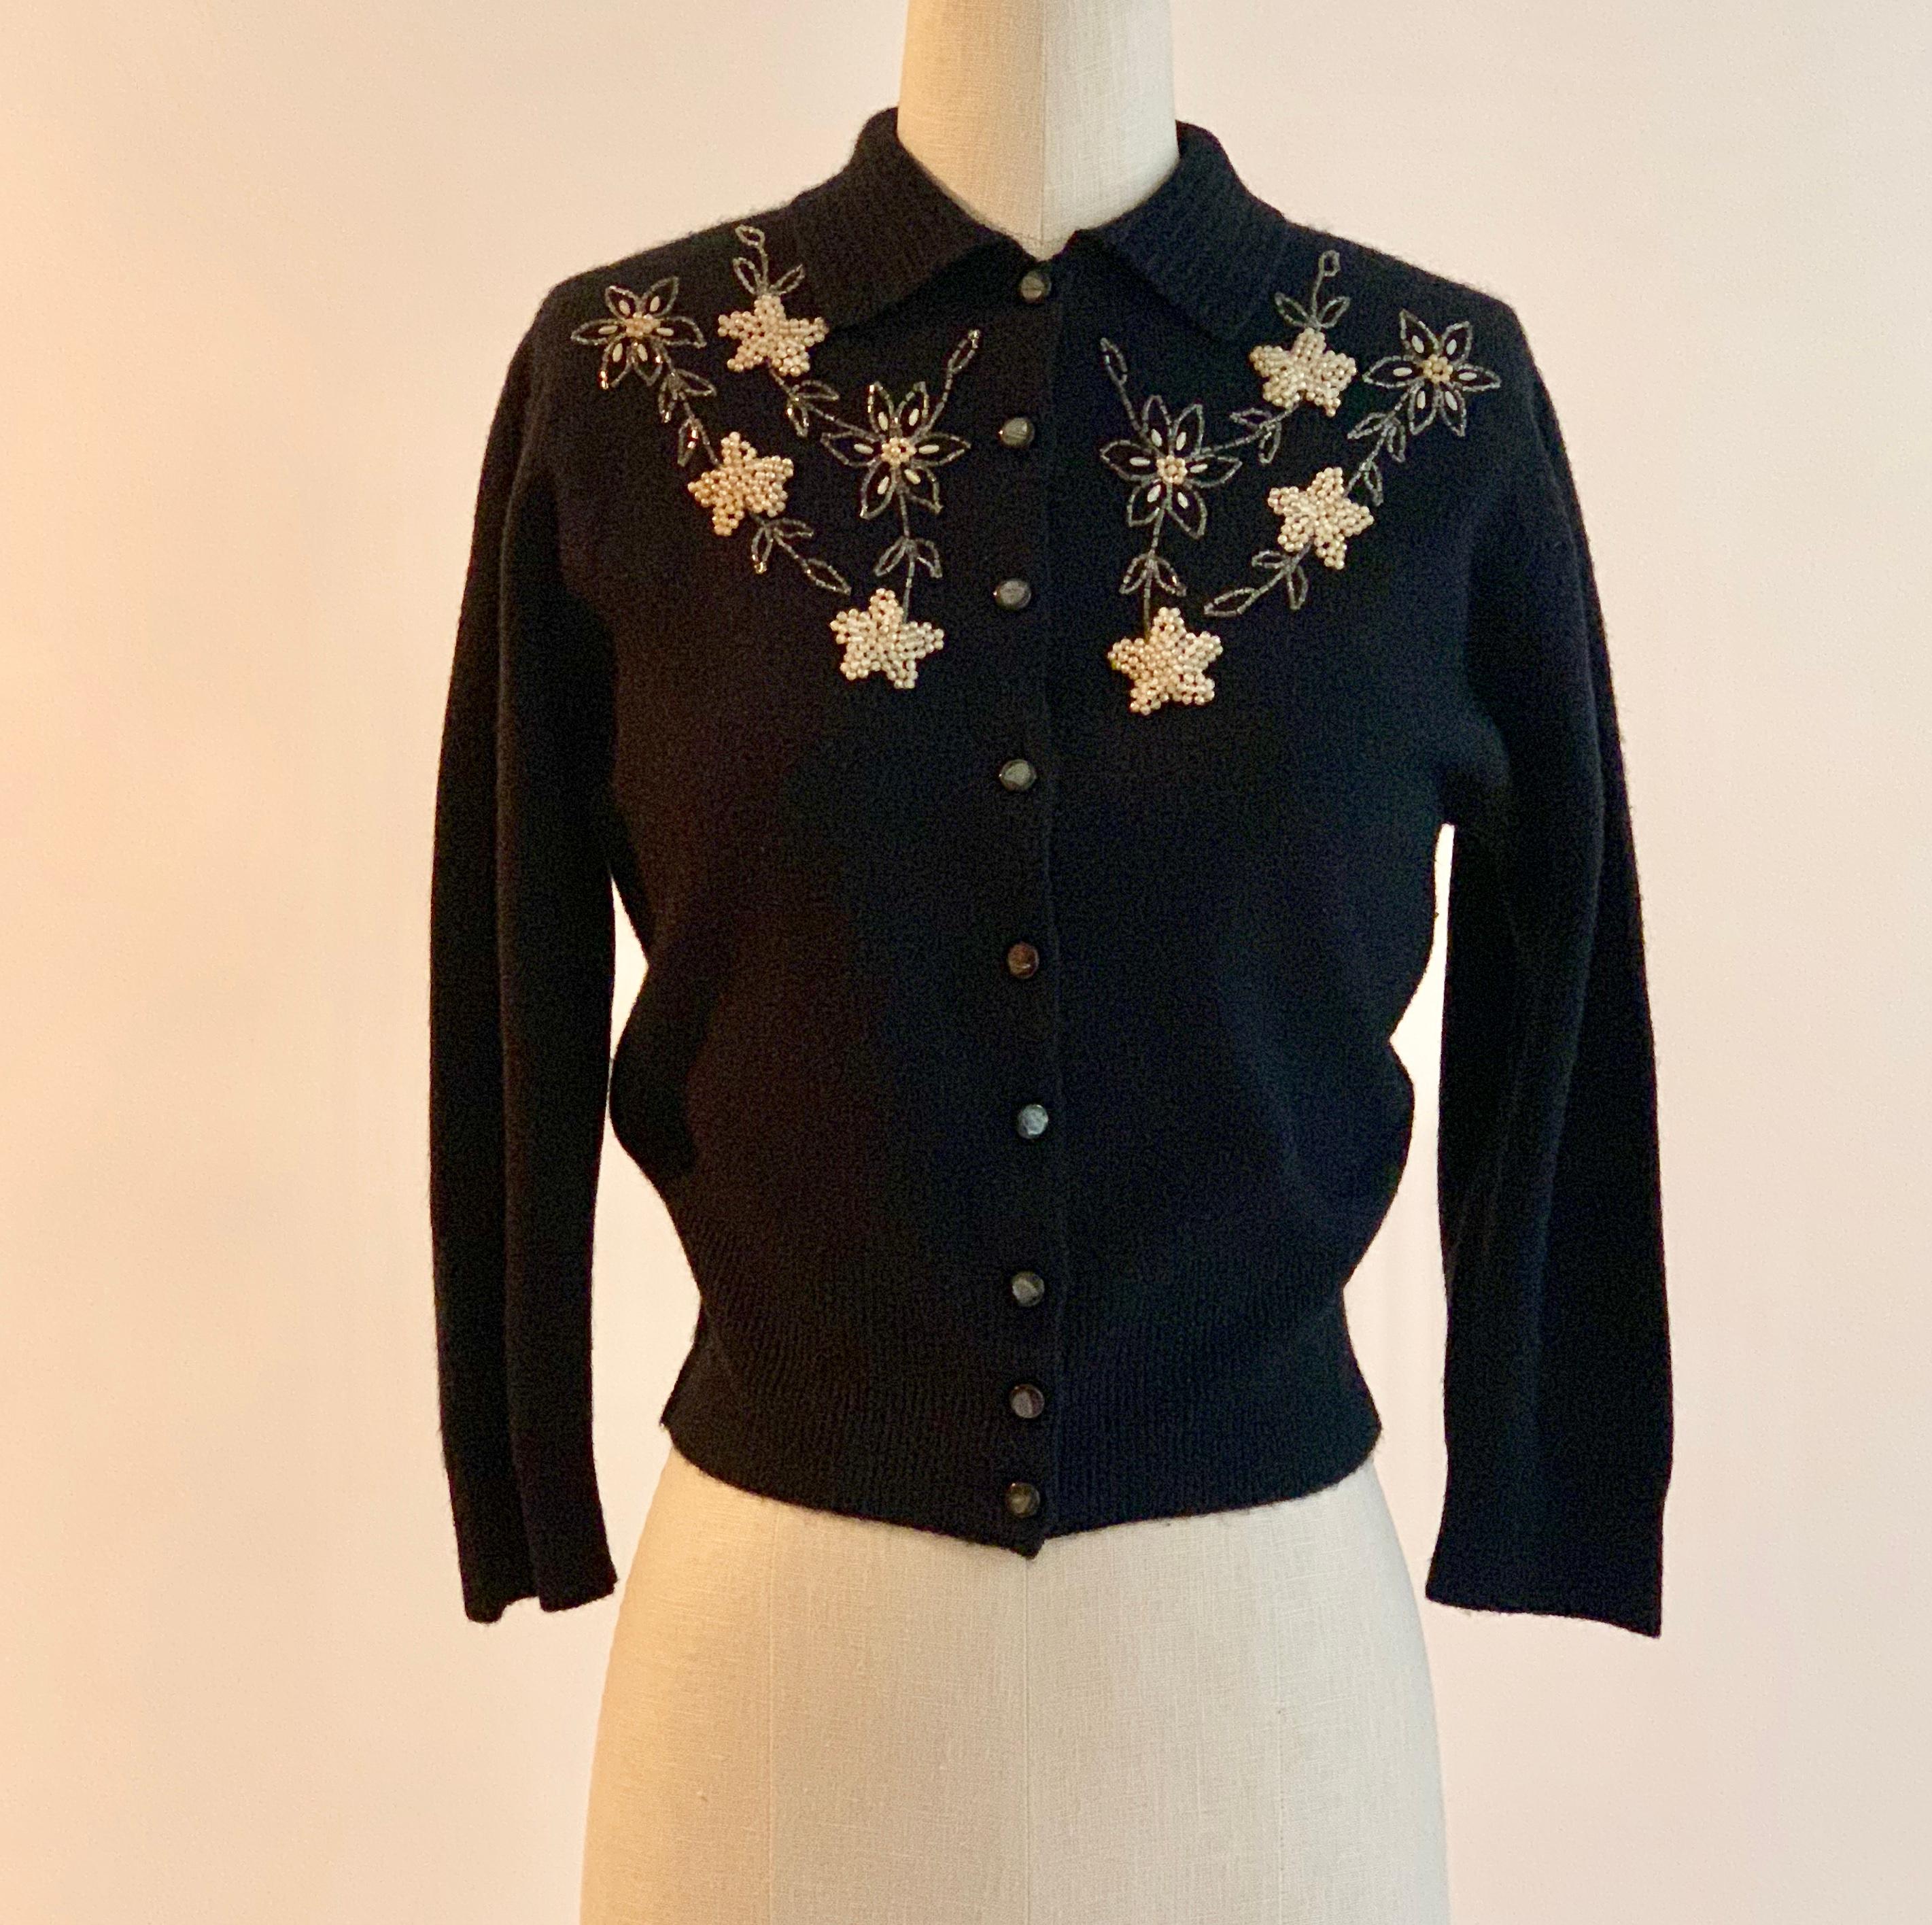 Schiaparelli vintage 1960s black cardigan sweater with rib knit collar and cream floral beading at chest. Slightly cropped length. 

Signed 'Styled by Schiaparelli, Paris' at label. 

No content label, feels like supersoft blend of wool/Angora and